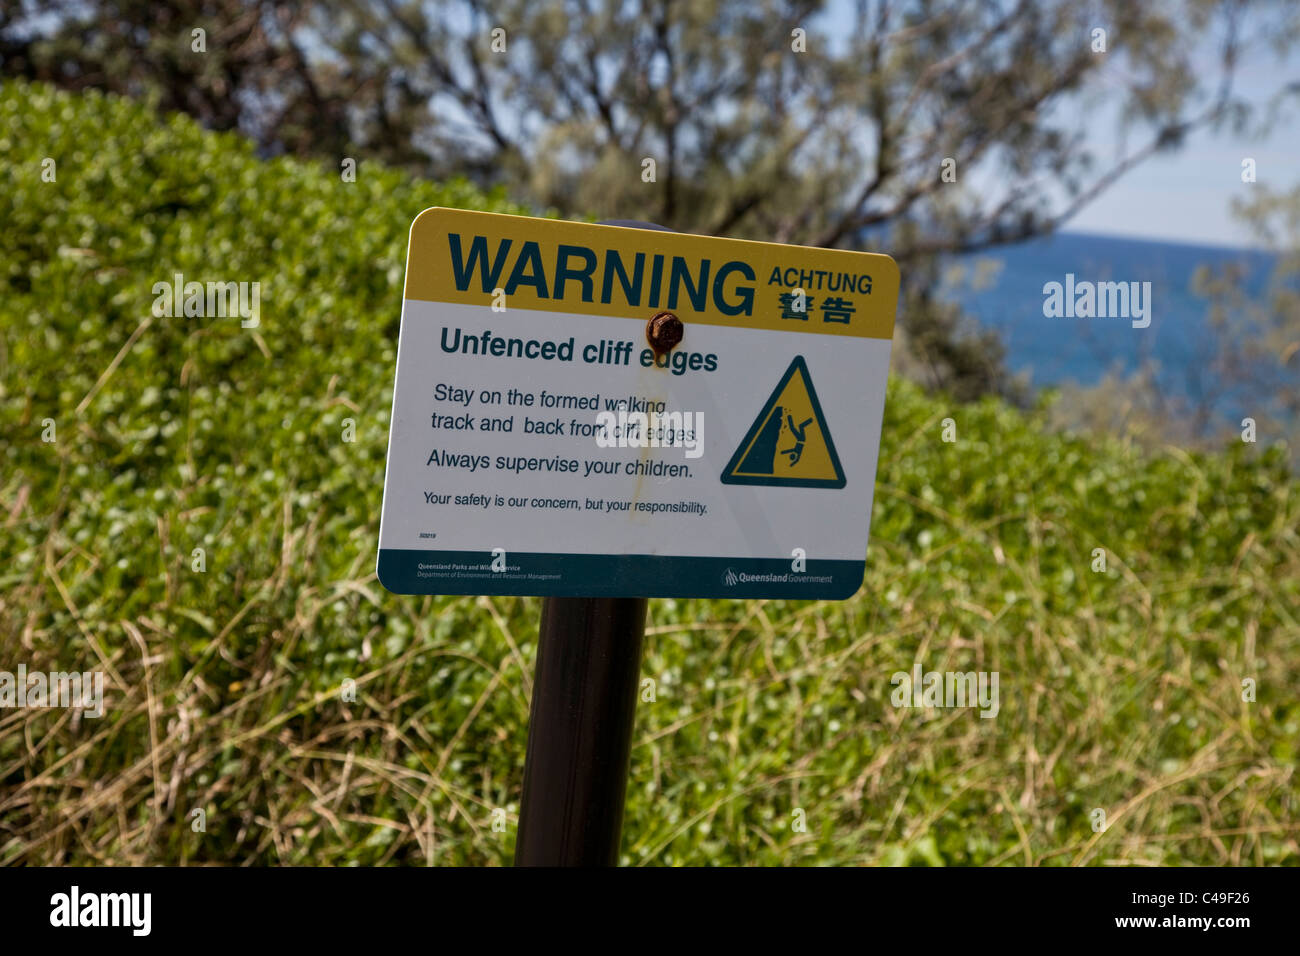 Warning Sign Achtung Beware of unfenced cliff edges Stock Photo